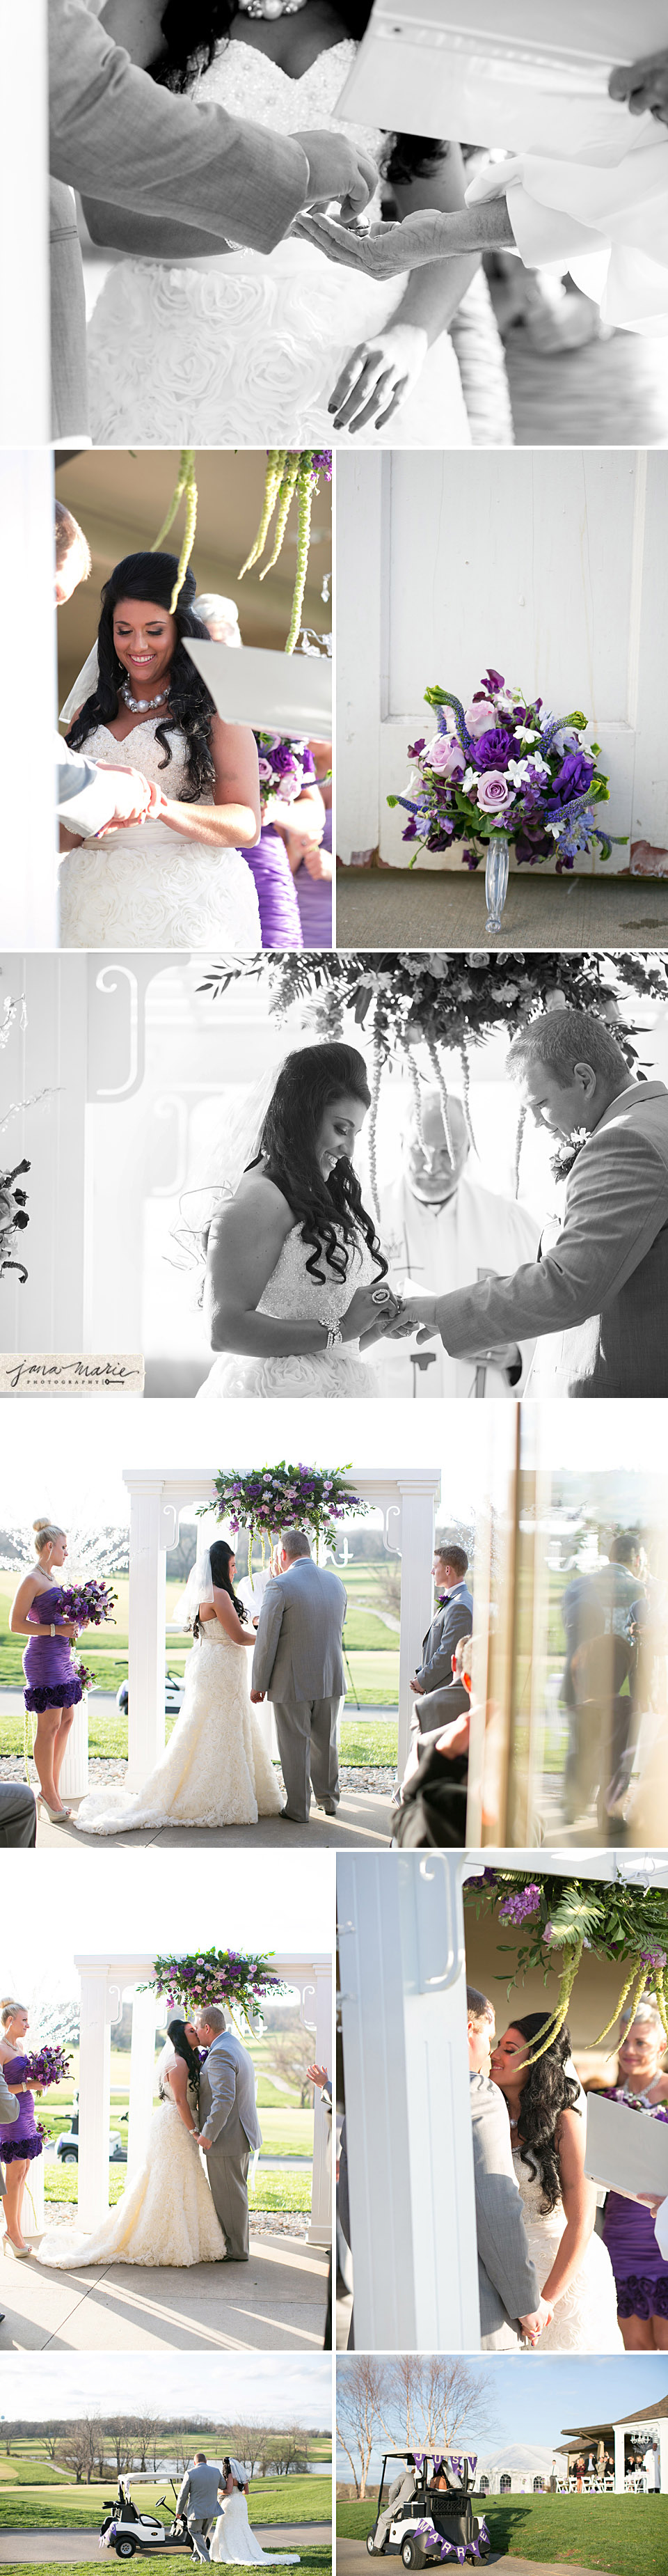 Exchanging vows, Drumm Farm weddings, Jana Marie Photography, Village Gardens, The Kiss